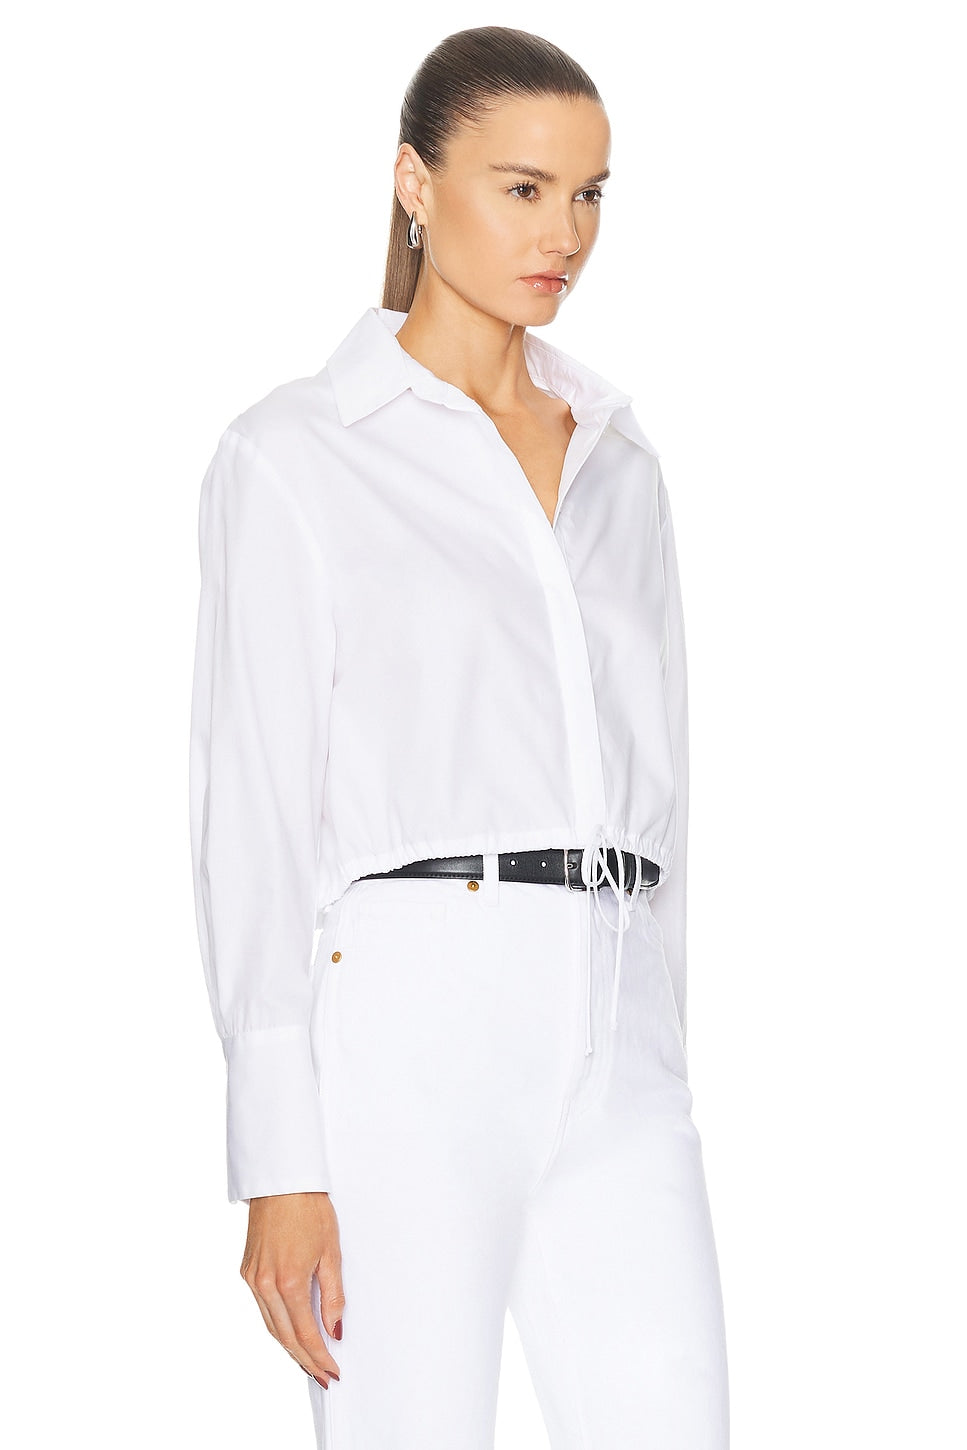 Enza Costa Poplin Drawcord Shirt White-Shirts-West of Woodward Boutique-Vancouver-Canada